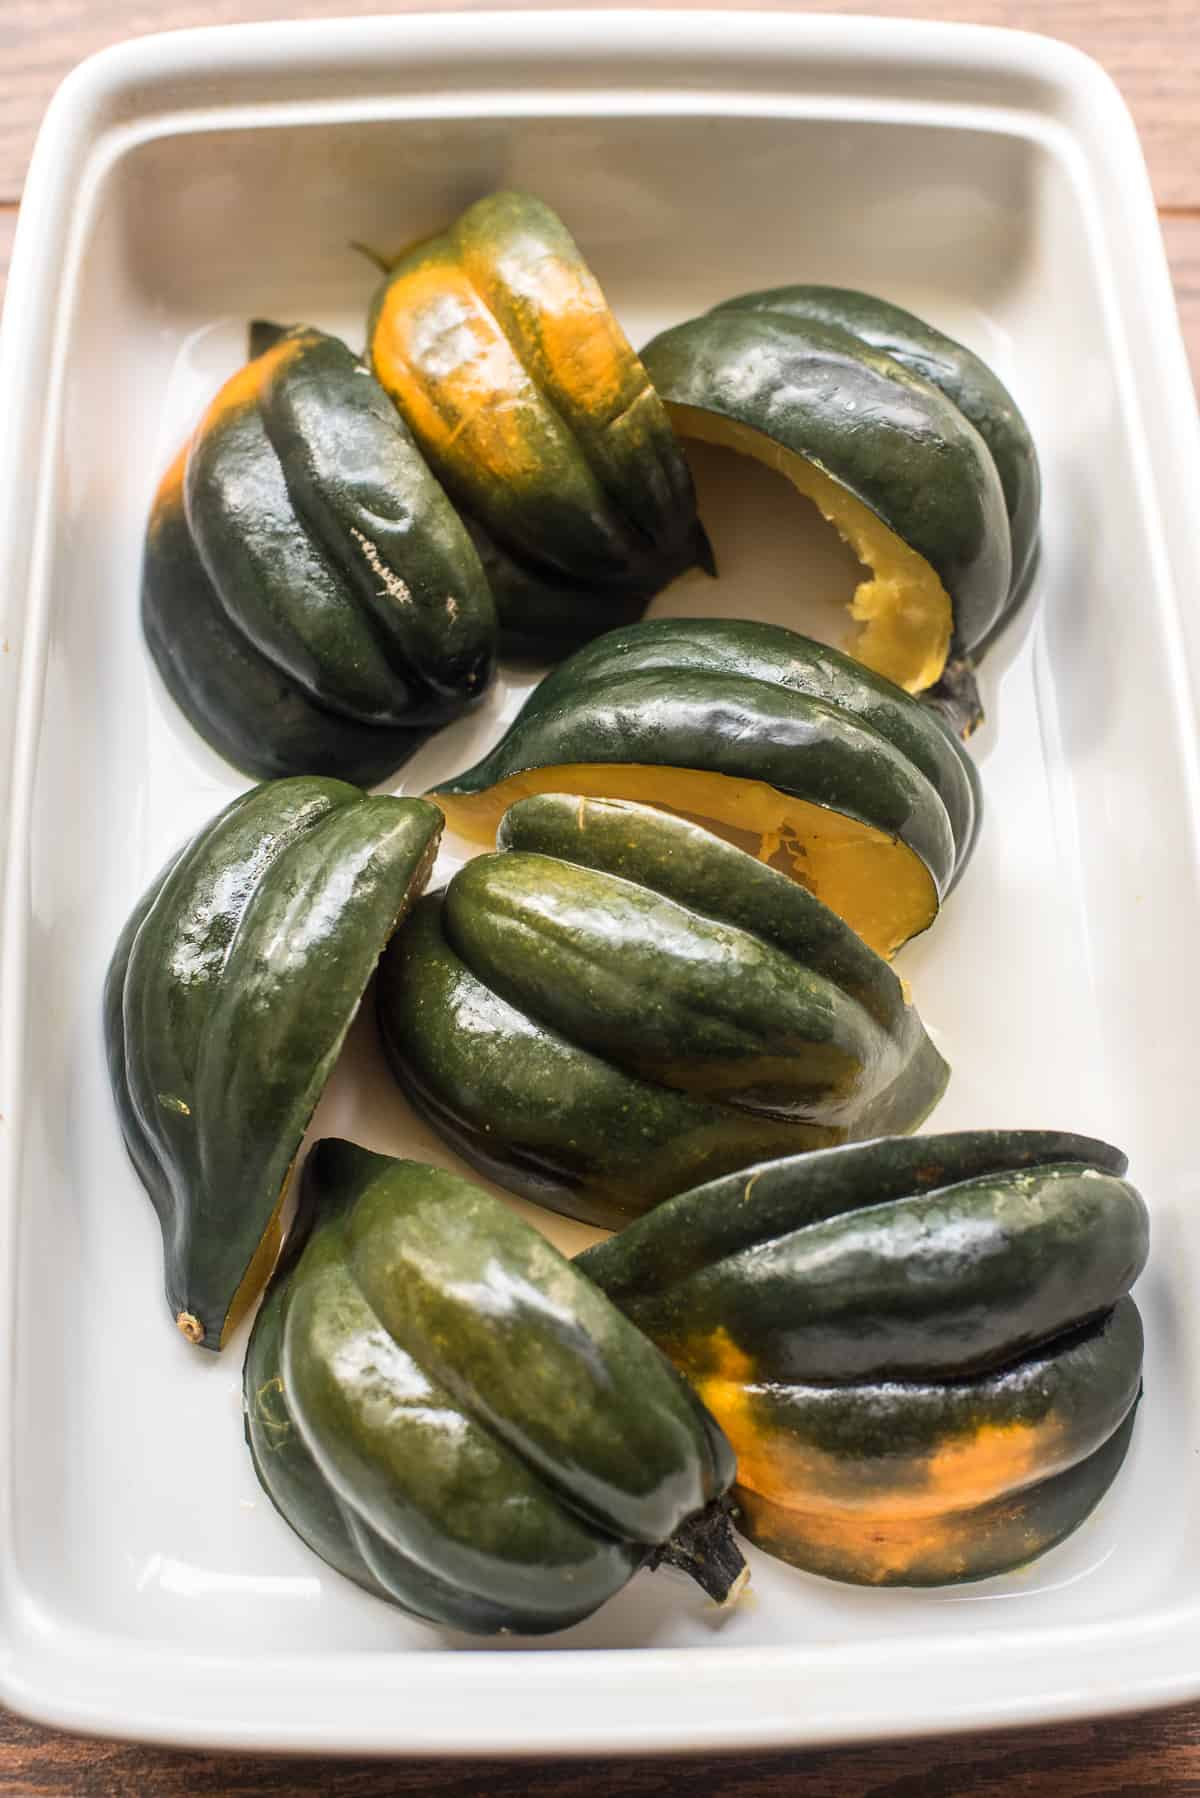 Quartered and baked acorn squash with the skin side up in a white baking dish.